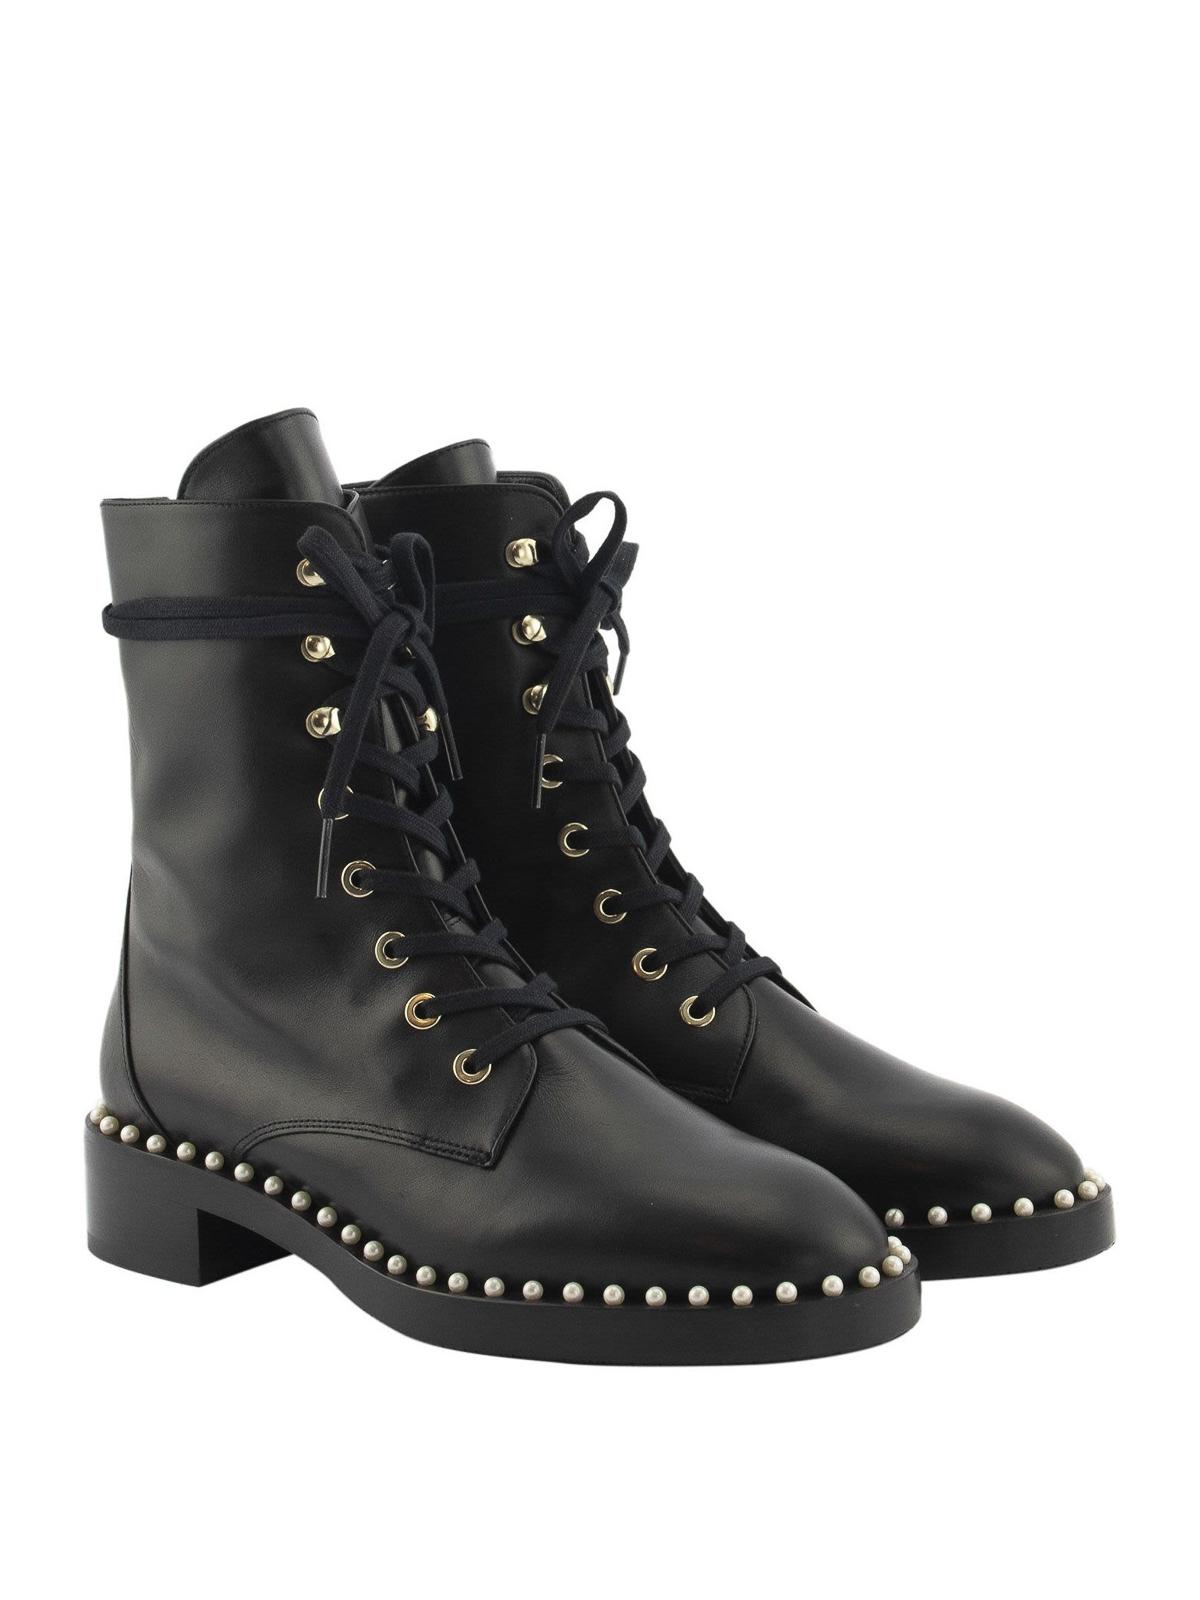 Stuart Weitzman Allie Bead Embellished Leather Combat Boots in Black - Lyst